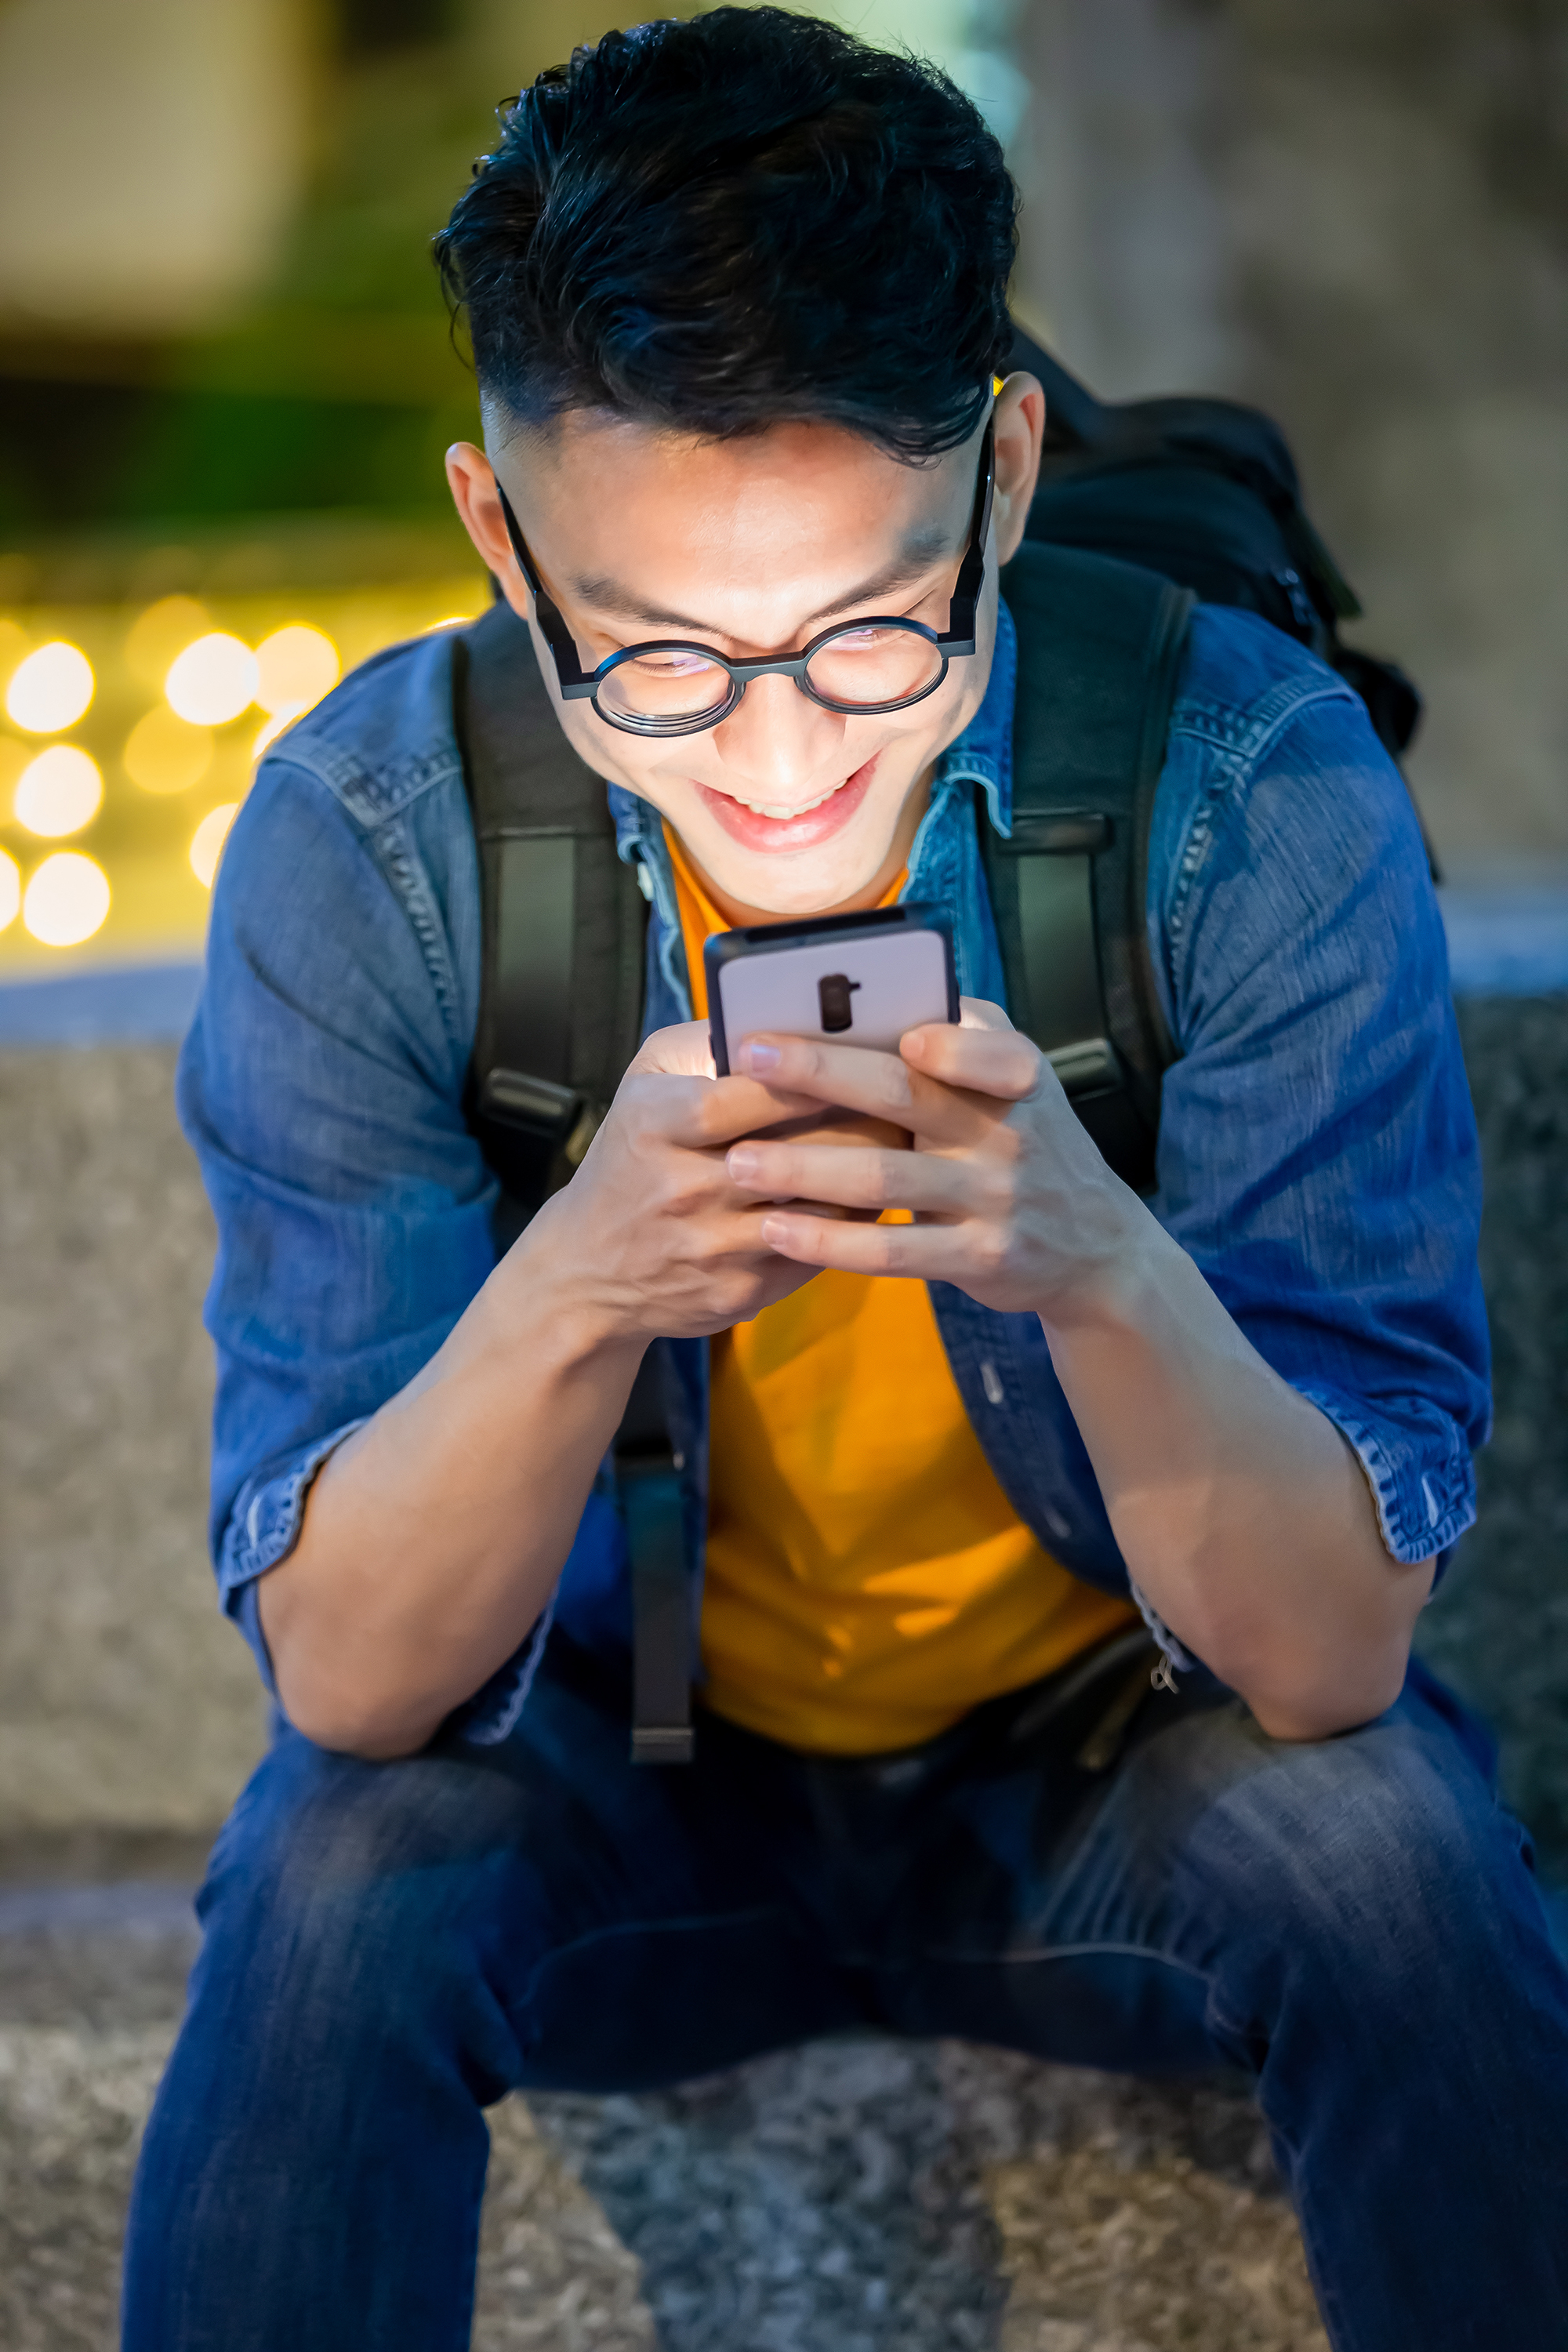 A young man using his phone | Source: Shutterstock